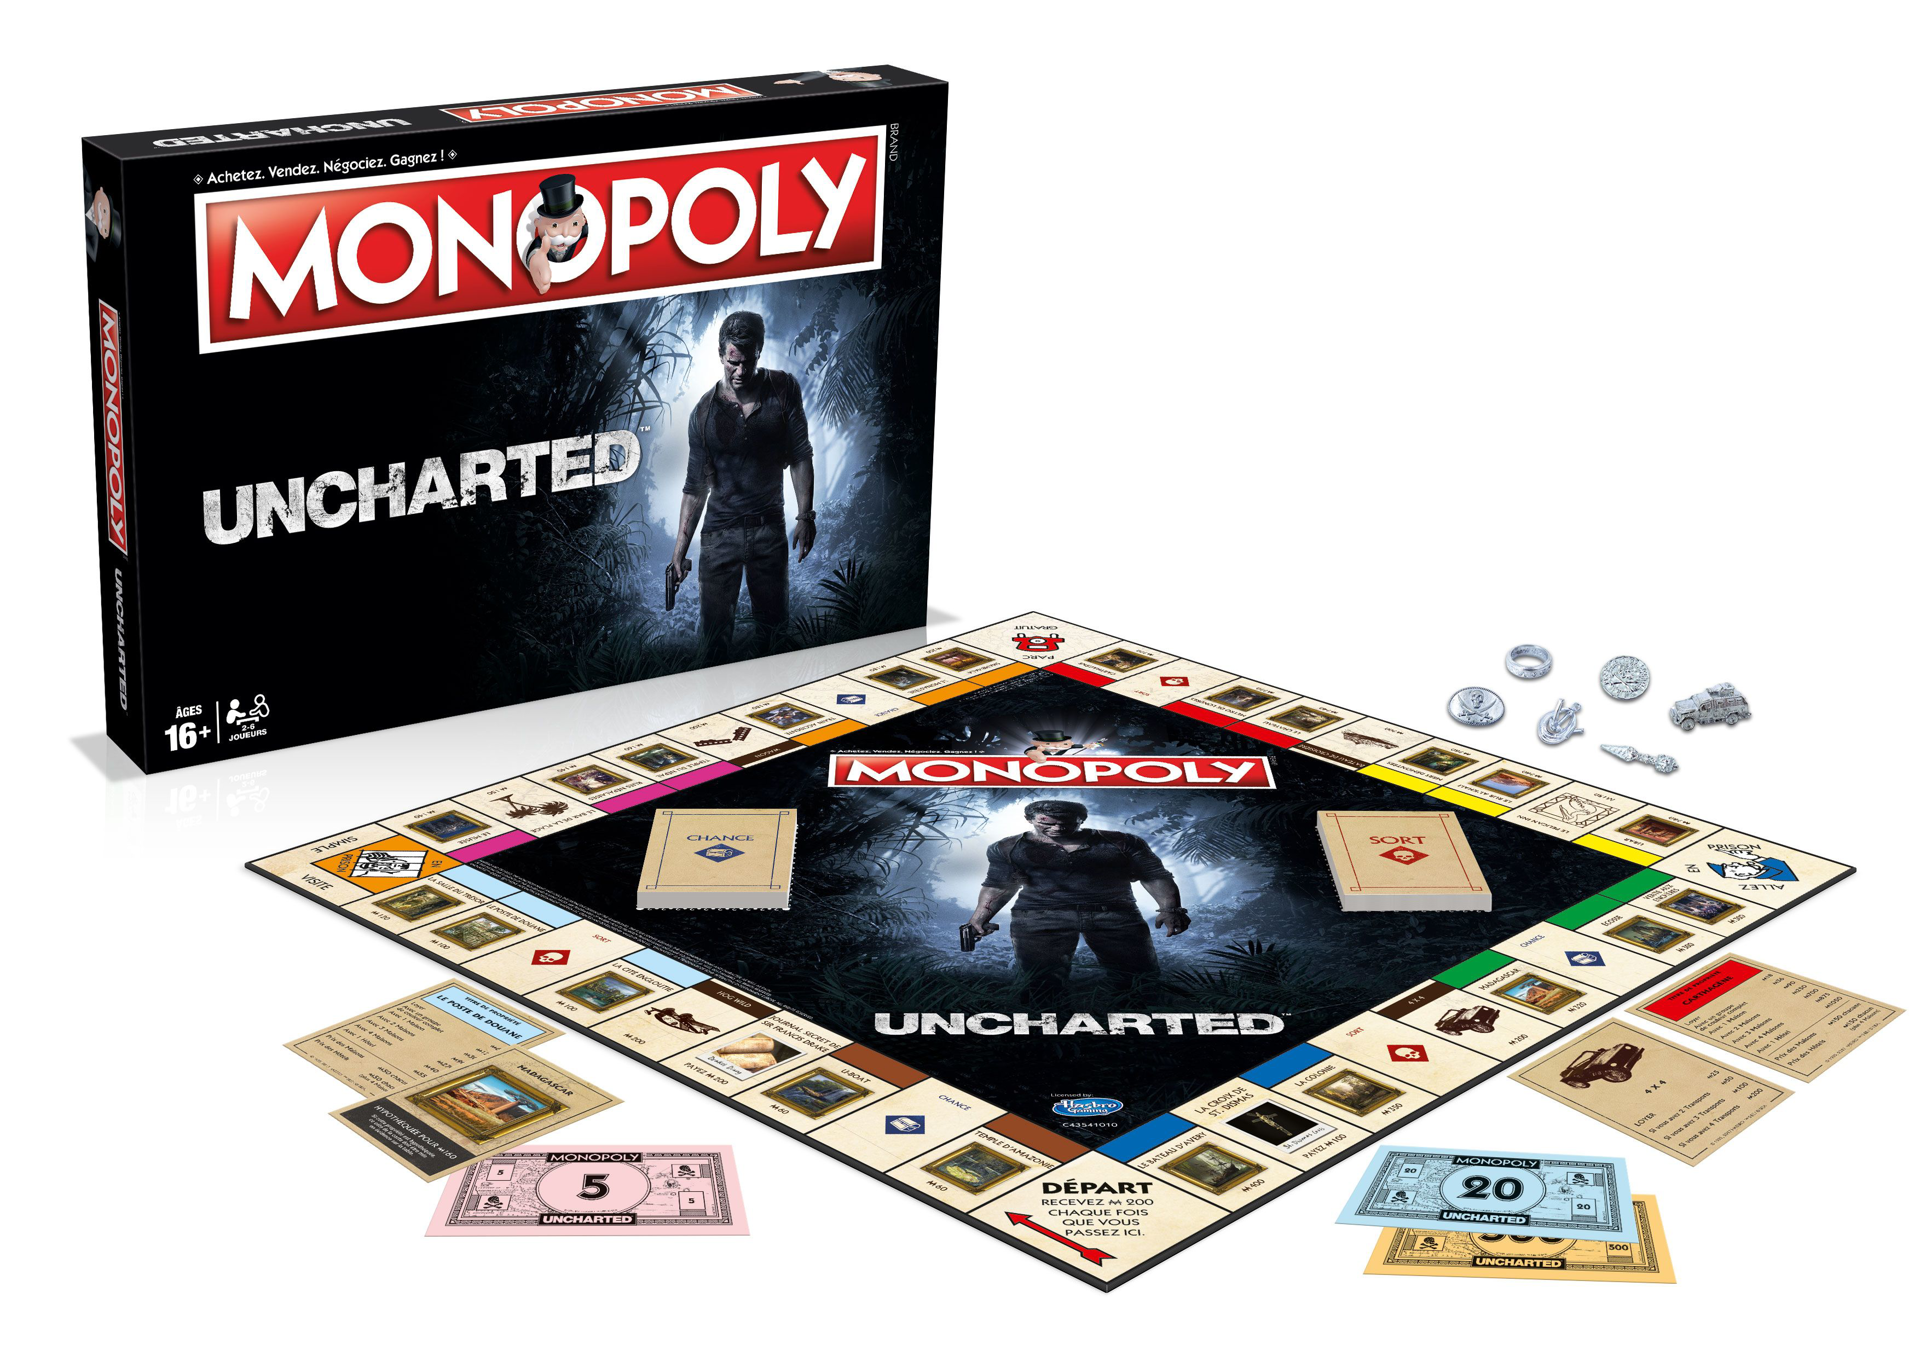 § Monopoly - Uncharted Edition